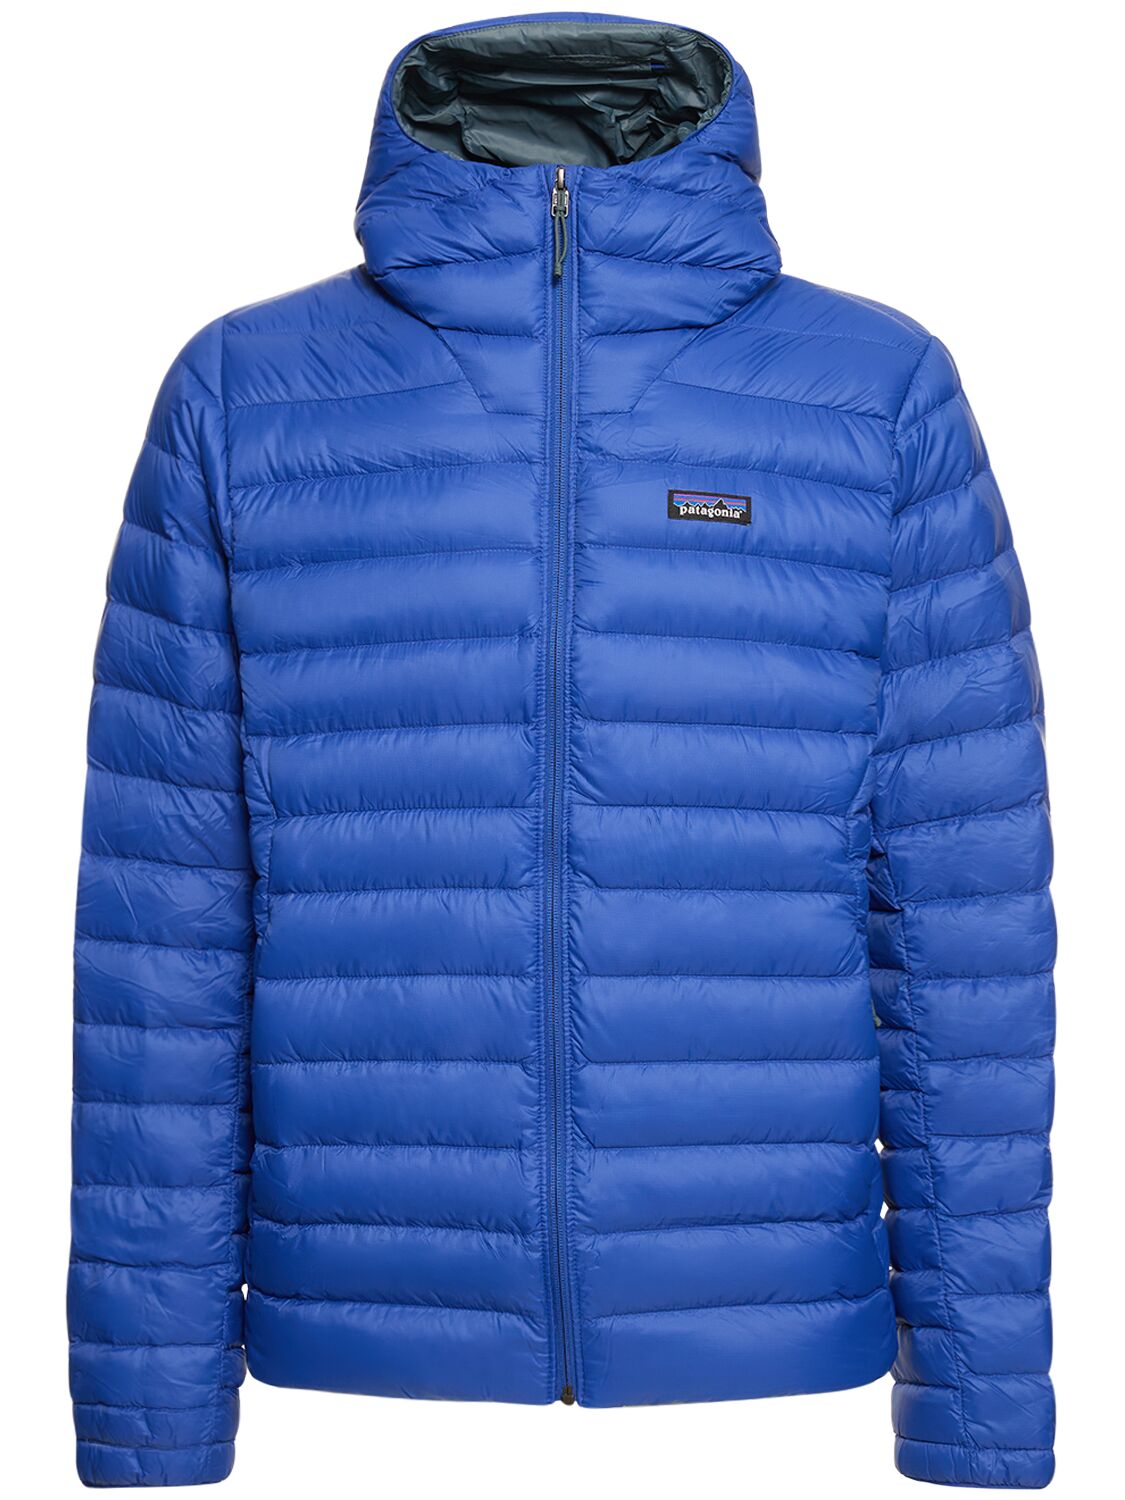 Image of Hooded Down Jacket